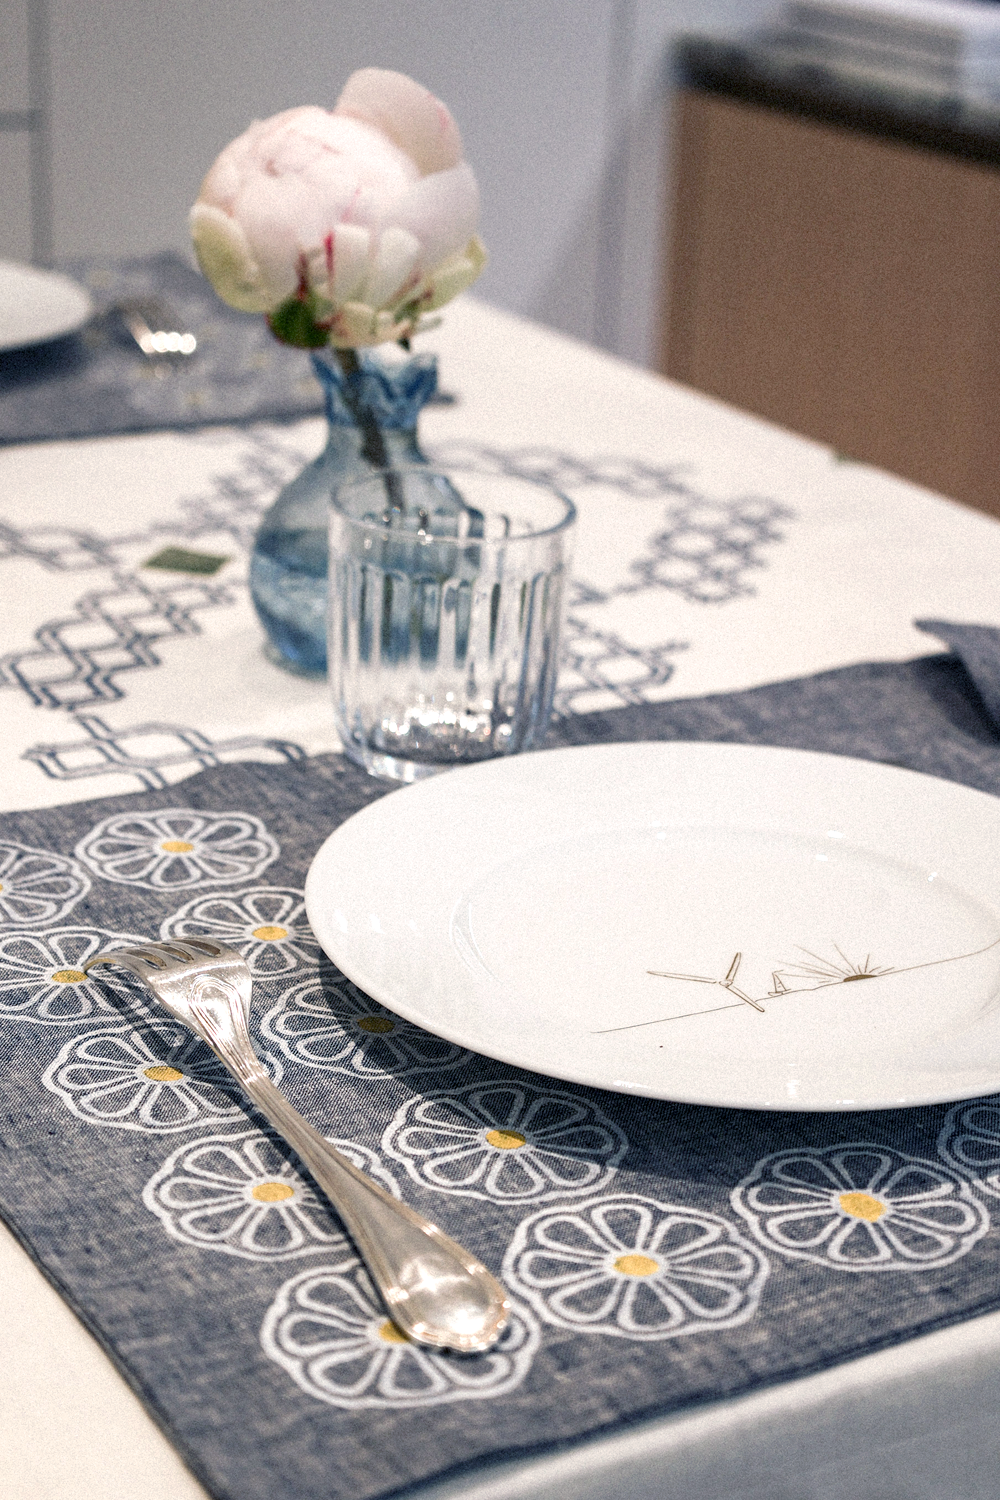 Handcrafted Blue Jean Linen Placemat with White Daisies | Perfect for Garden Parties | Ethical & Sustainable by Beyt